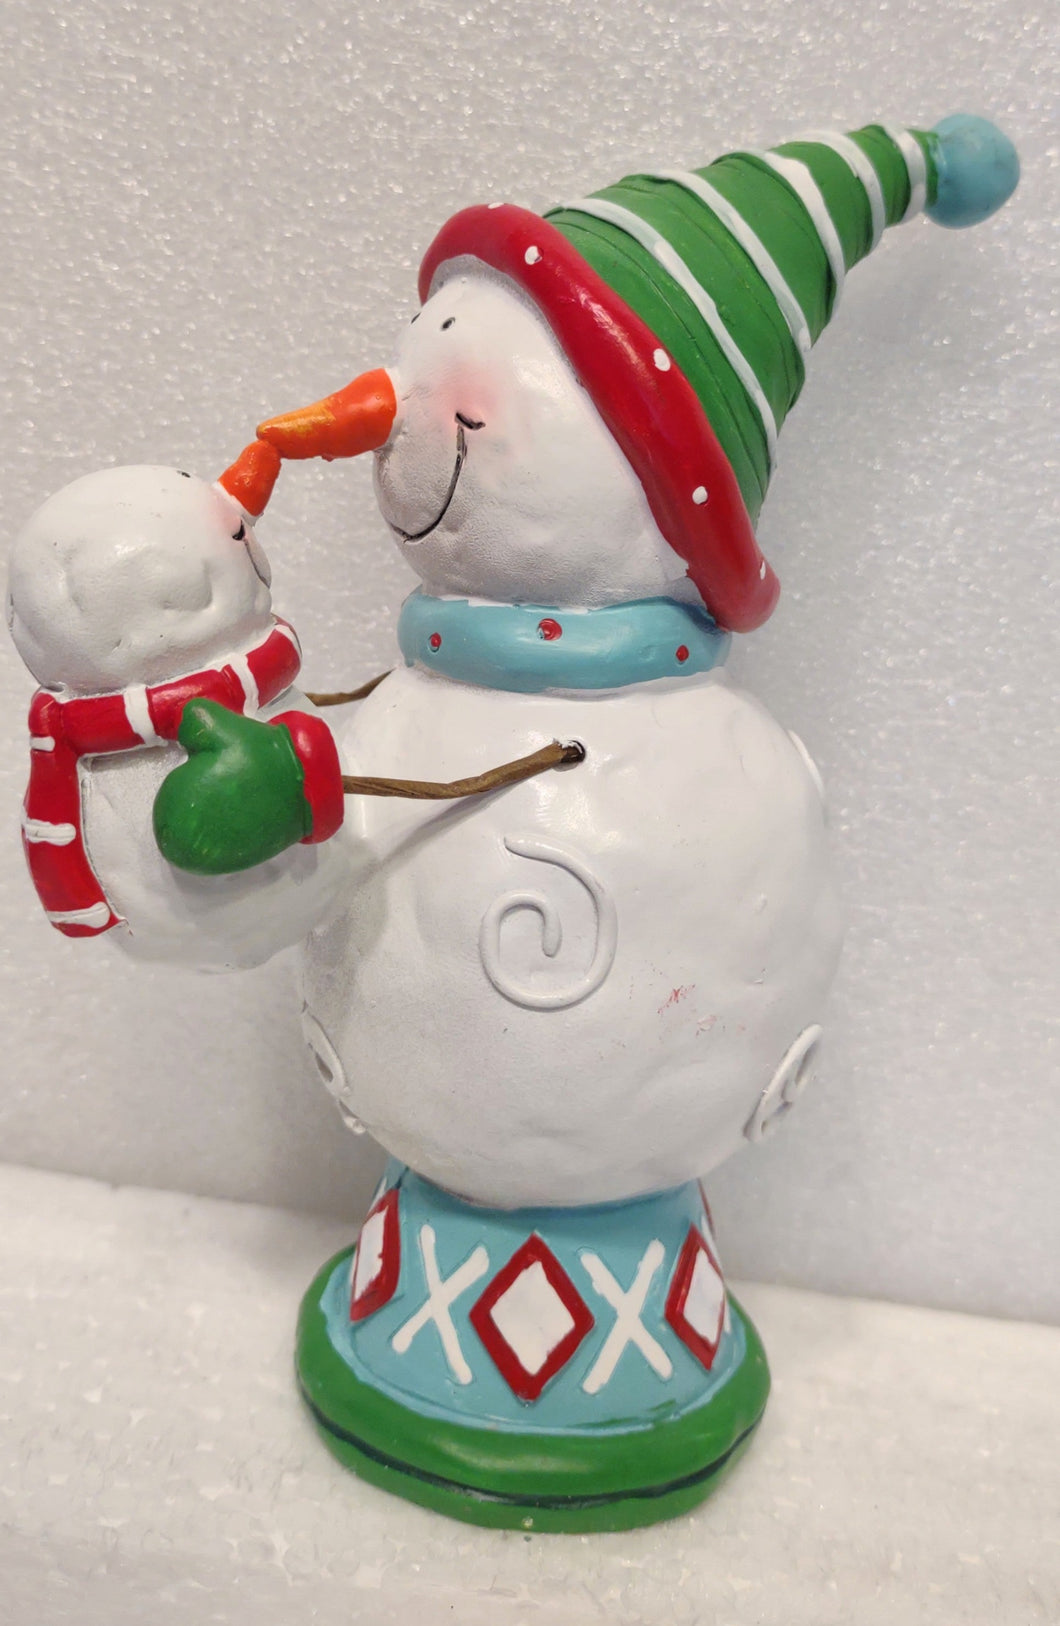 Snowman Holding Baby Snowman Wearing Red Scarf Figurine